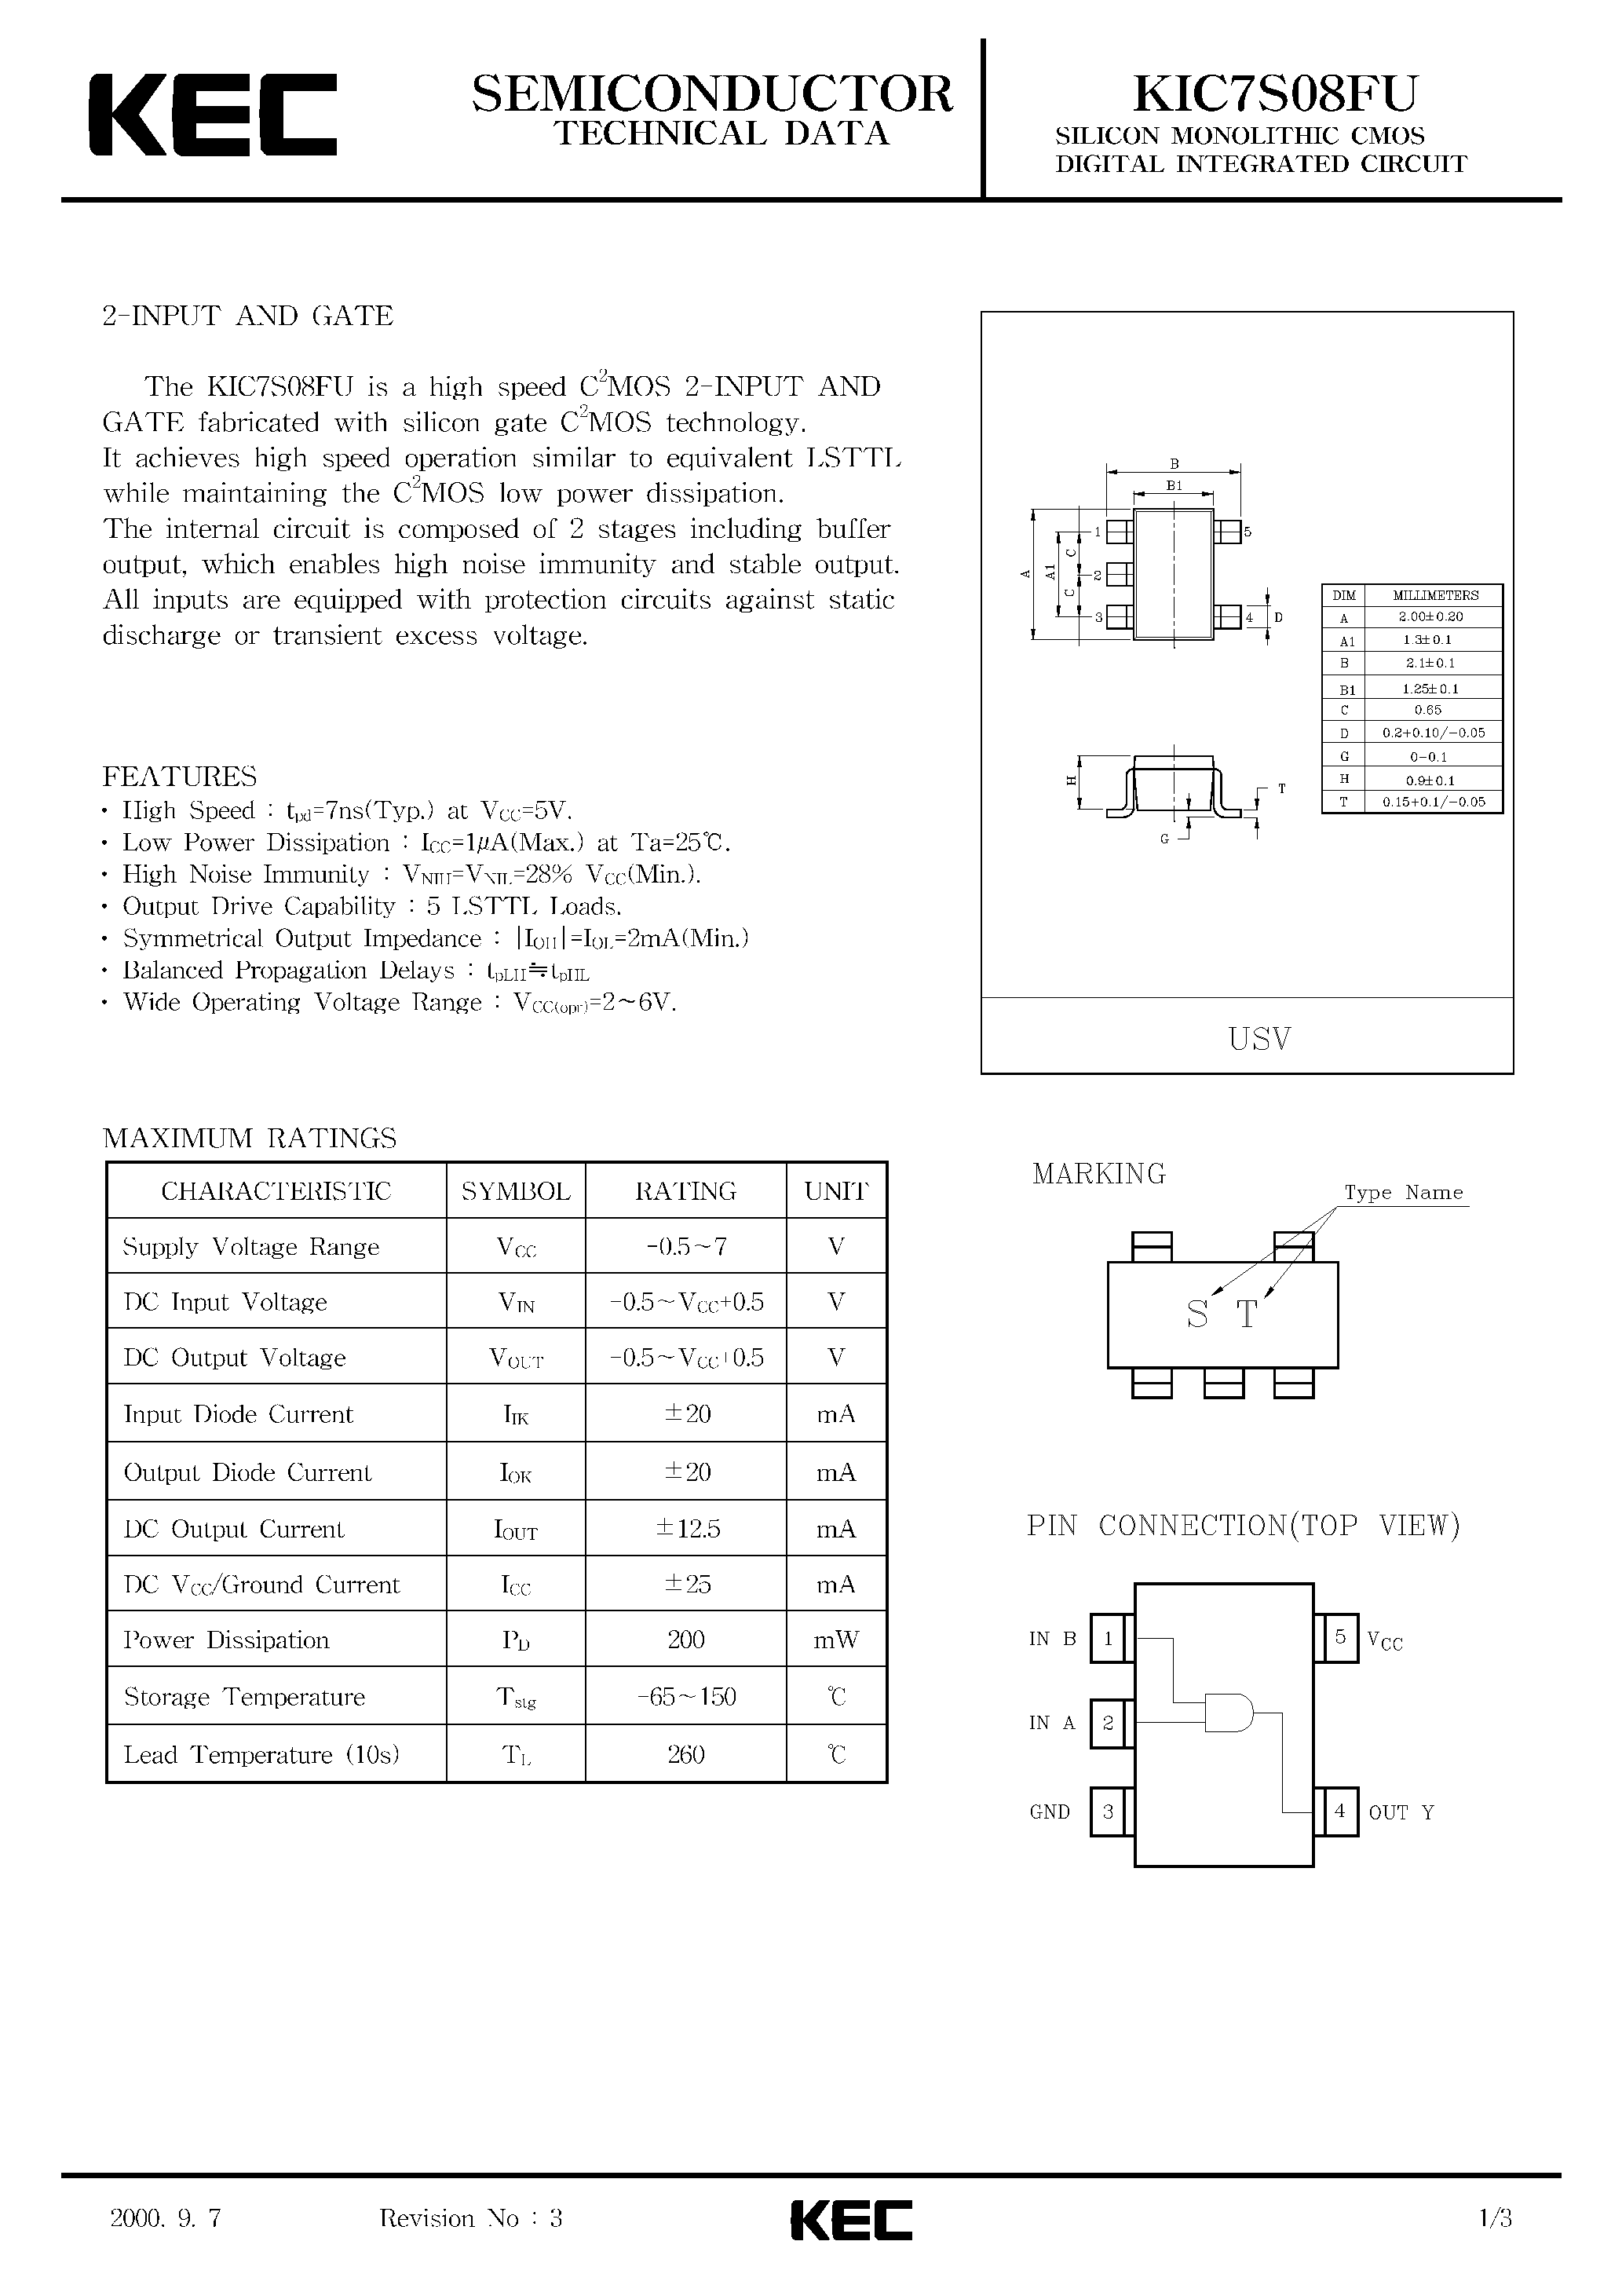 Даташит KIC7S08FU-SILICON MONOLITHIC CMOS DIGITAL INTEGRATED CIRCUIT(2-INPUT AND GATE) страница 1